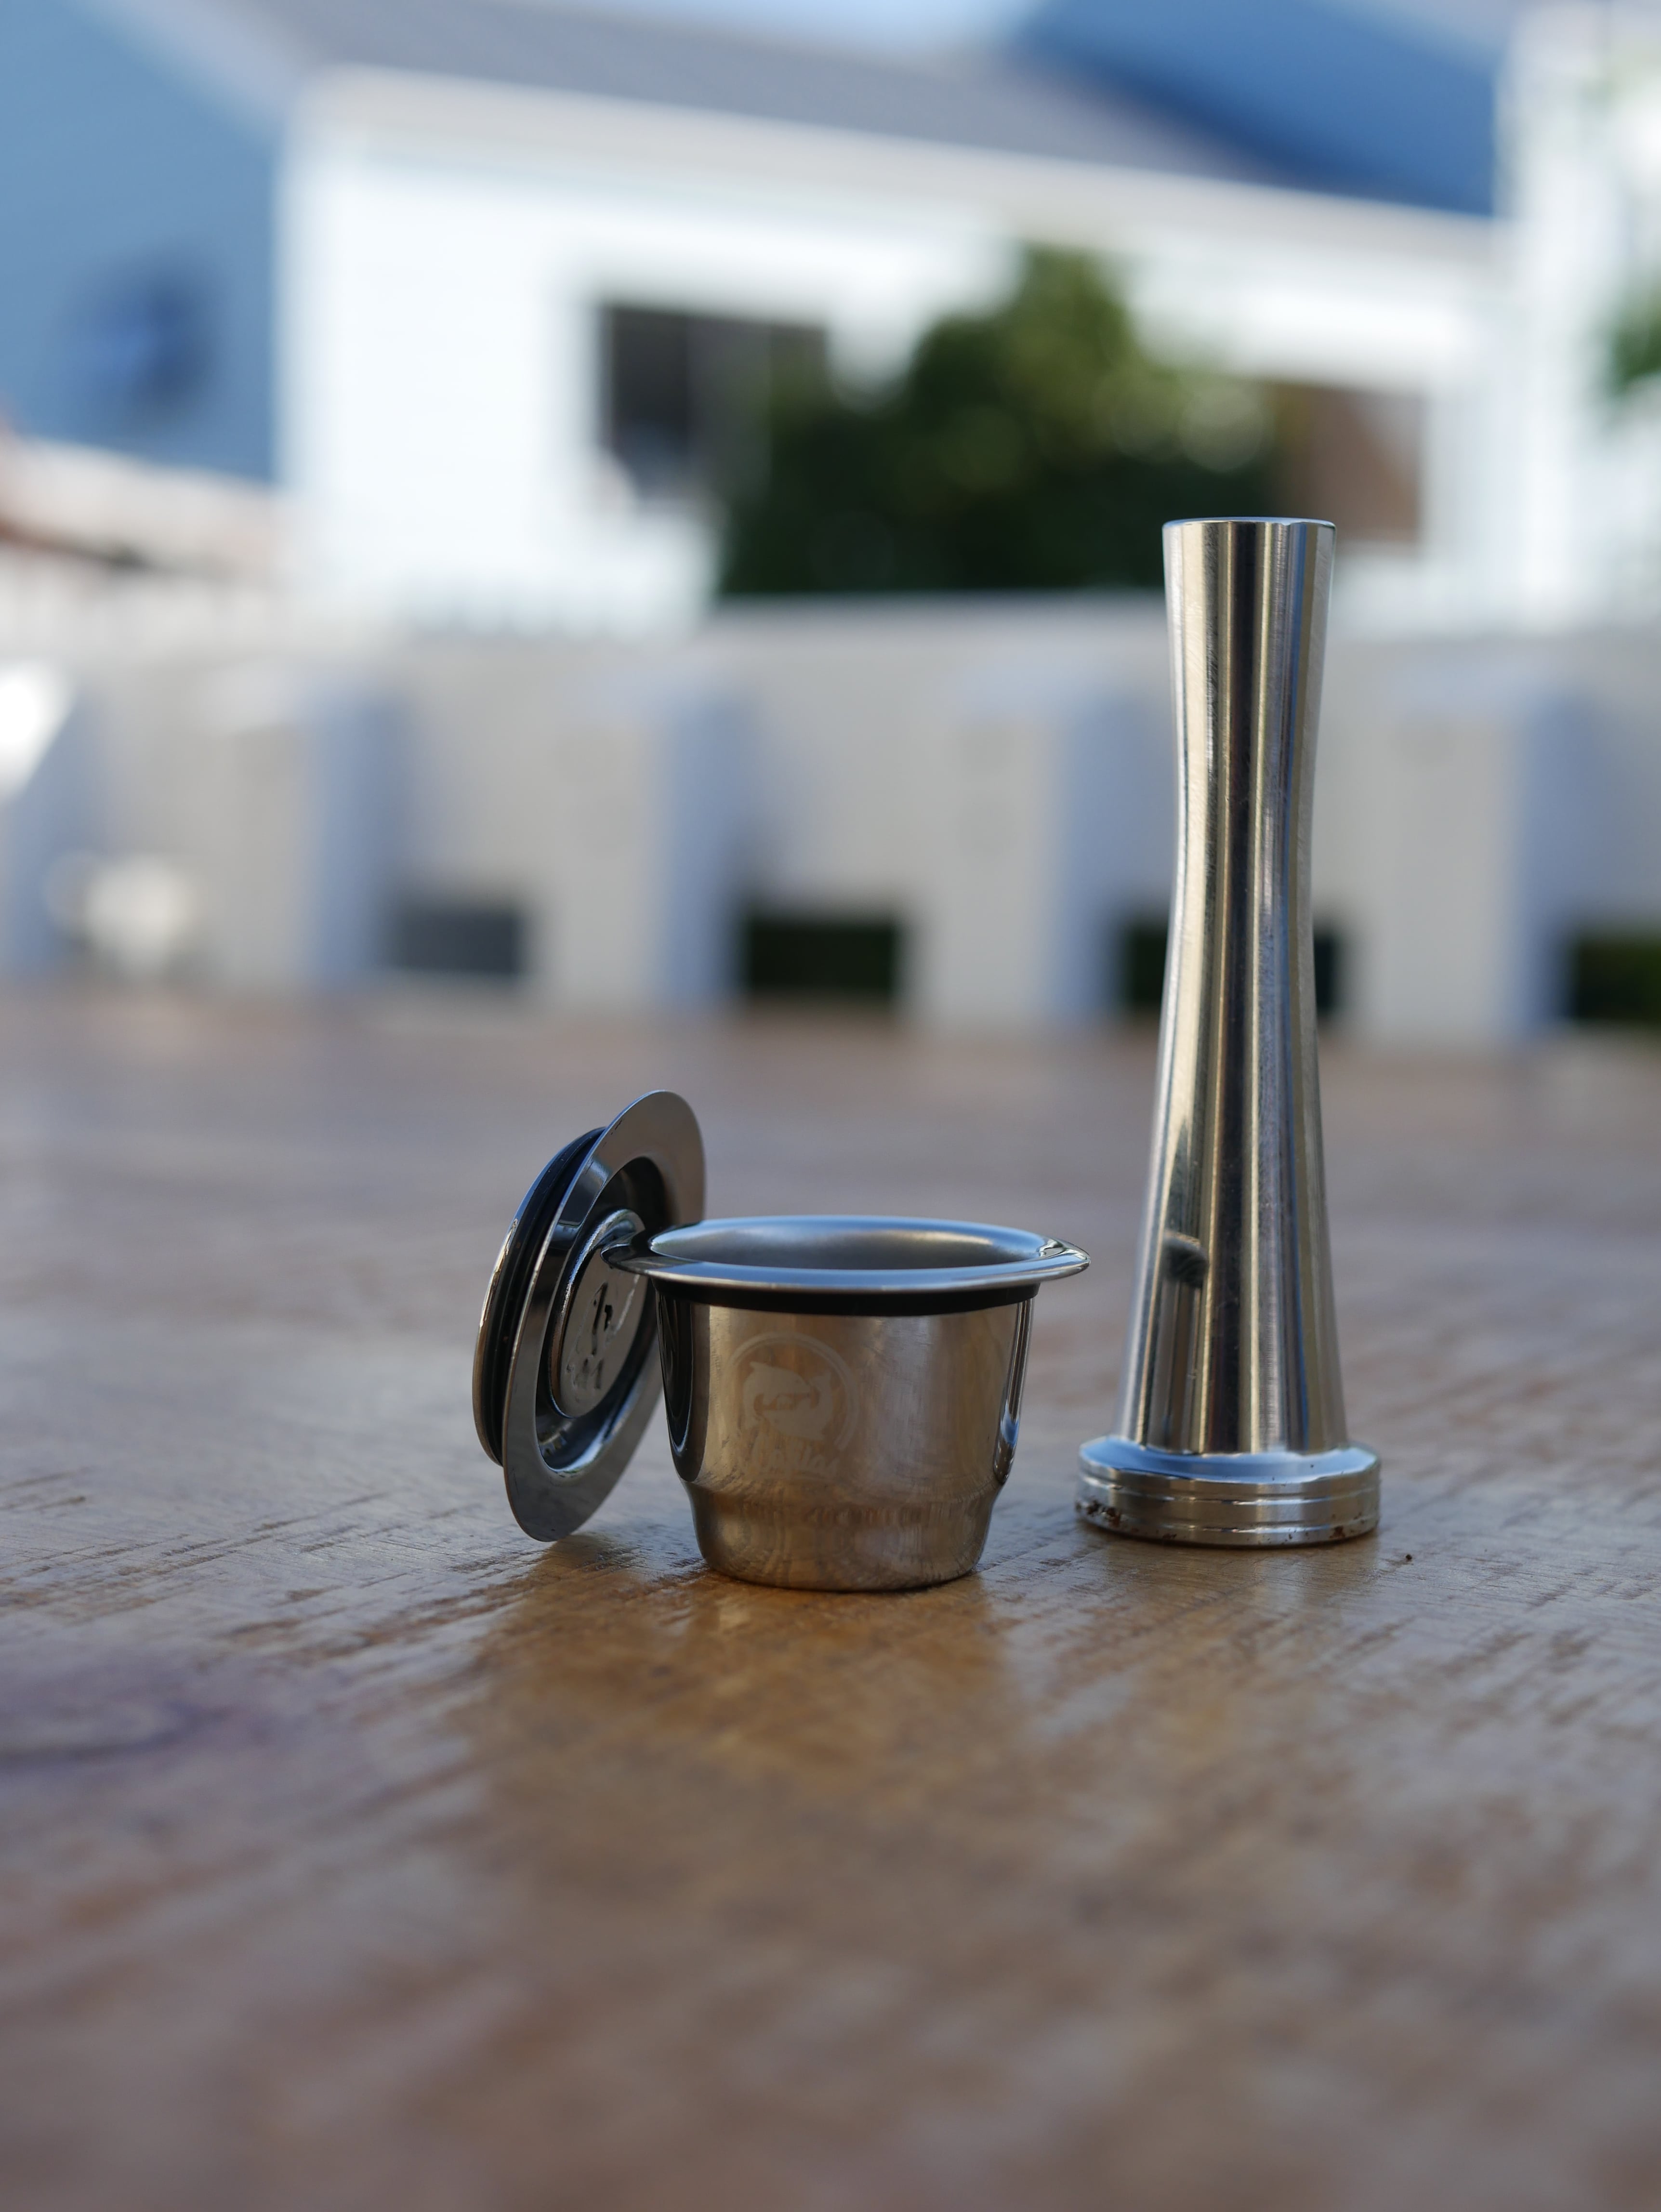 Reusable Stainless Steel Coffee Pod Kit + Tamper